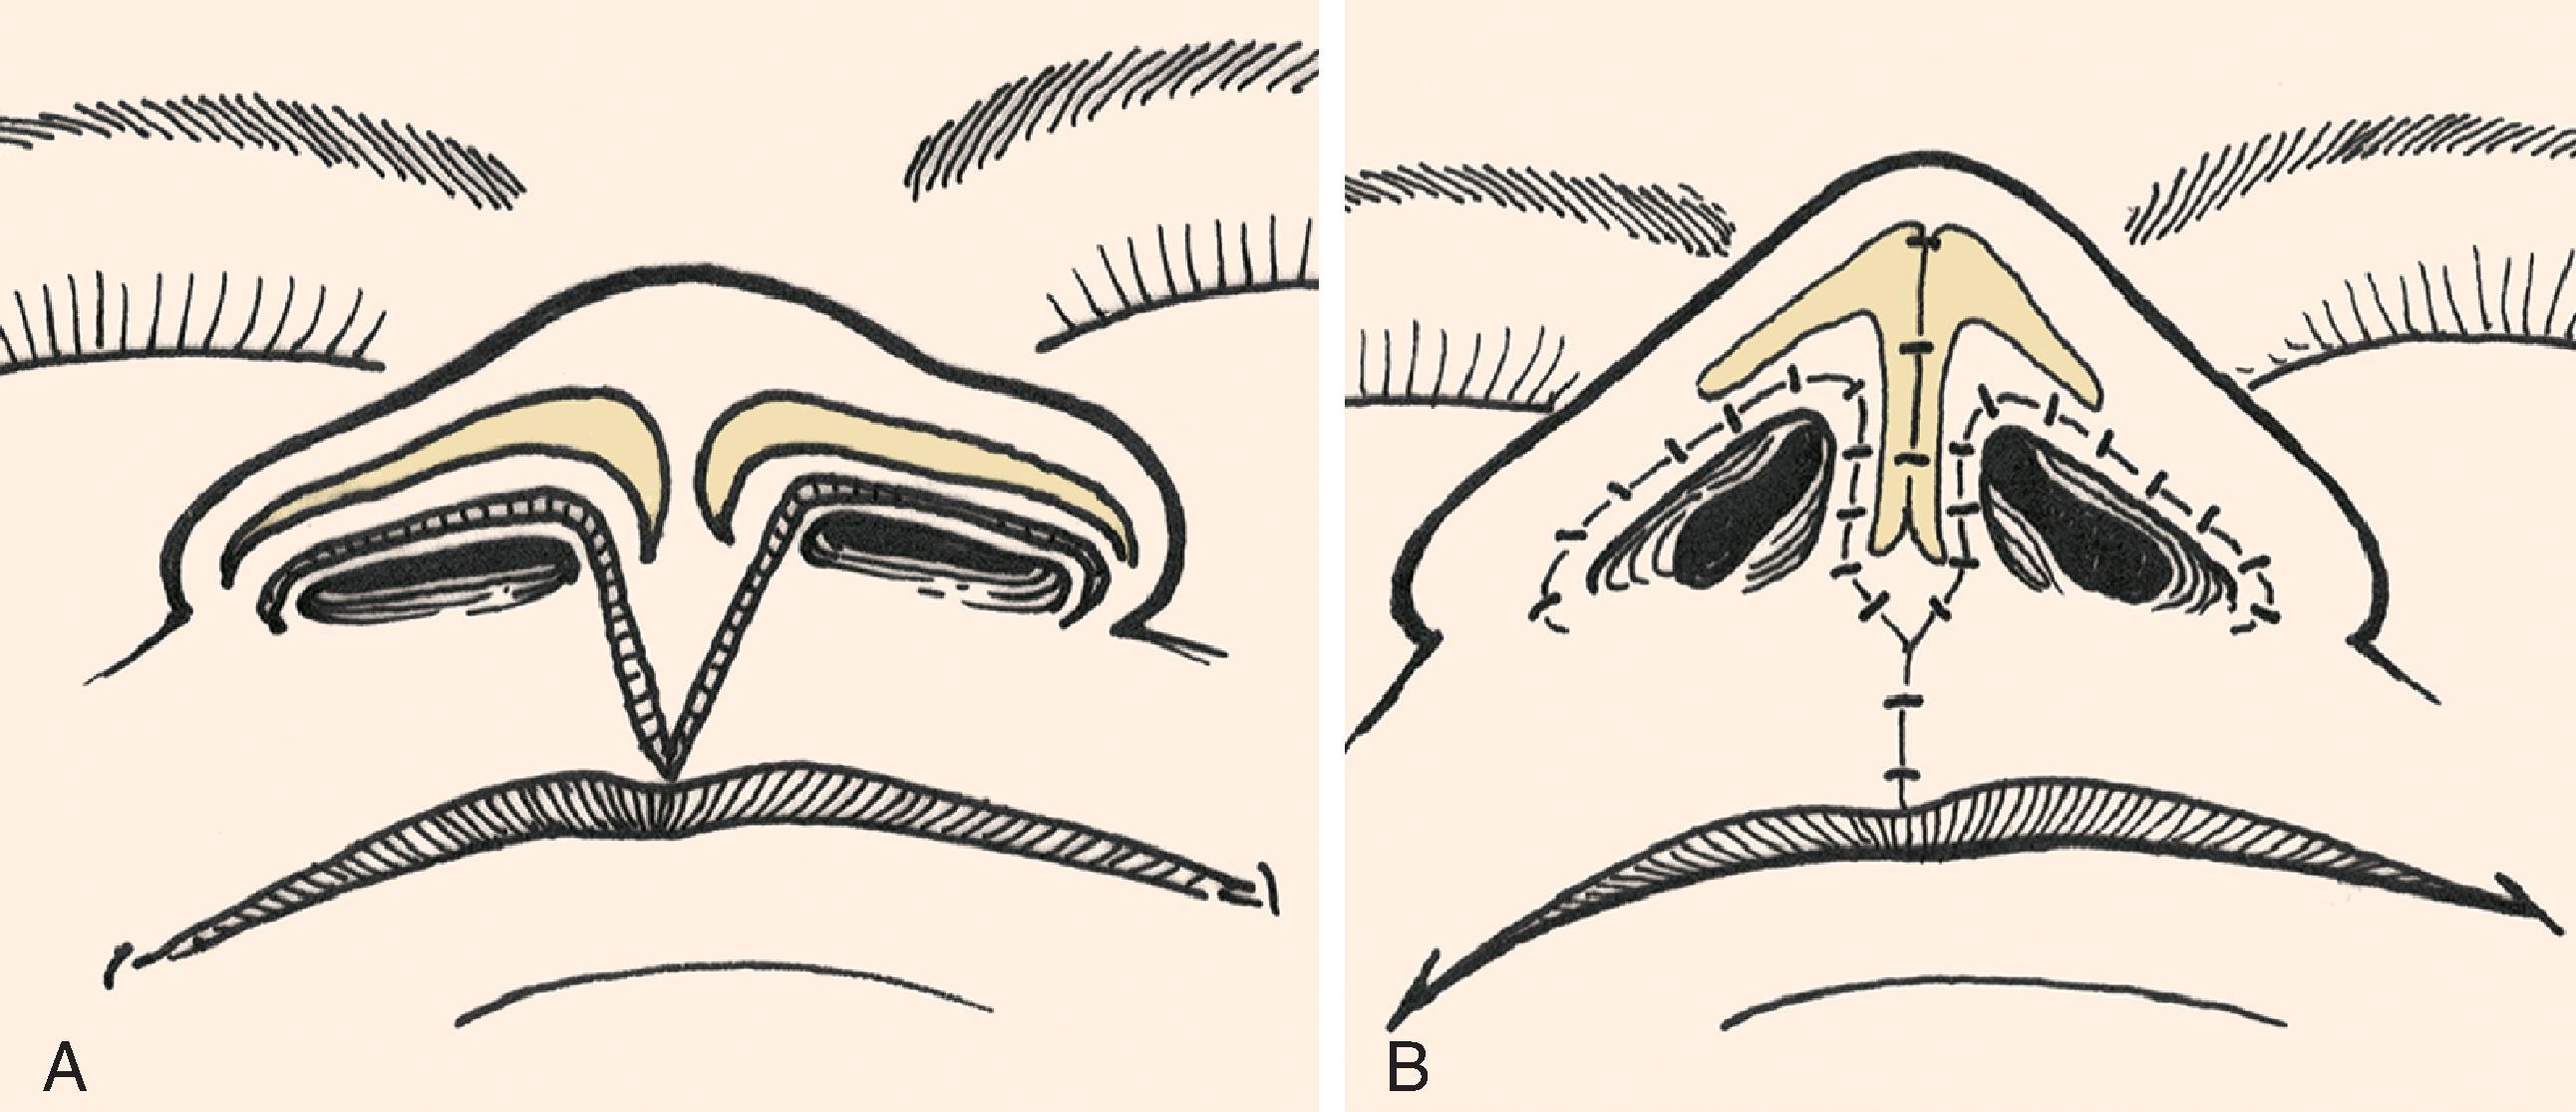 FIG. 9.10, A , B , V-to-Y advancement flap dissected from philtrum by recruiting skin from midportion of lip between philtral ridges. Length of columella augmented by advancement of flap superiorly into base of columella. (From Brown MD: Advancement flaps. In Baker SR, Swanson NA [eds]: Local Flaps in Facial Reconstruction . St. Louis, Mosby, 1995, p 106, Fig 14, with permission.)